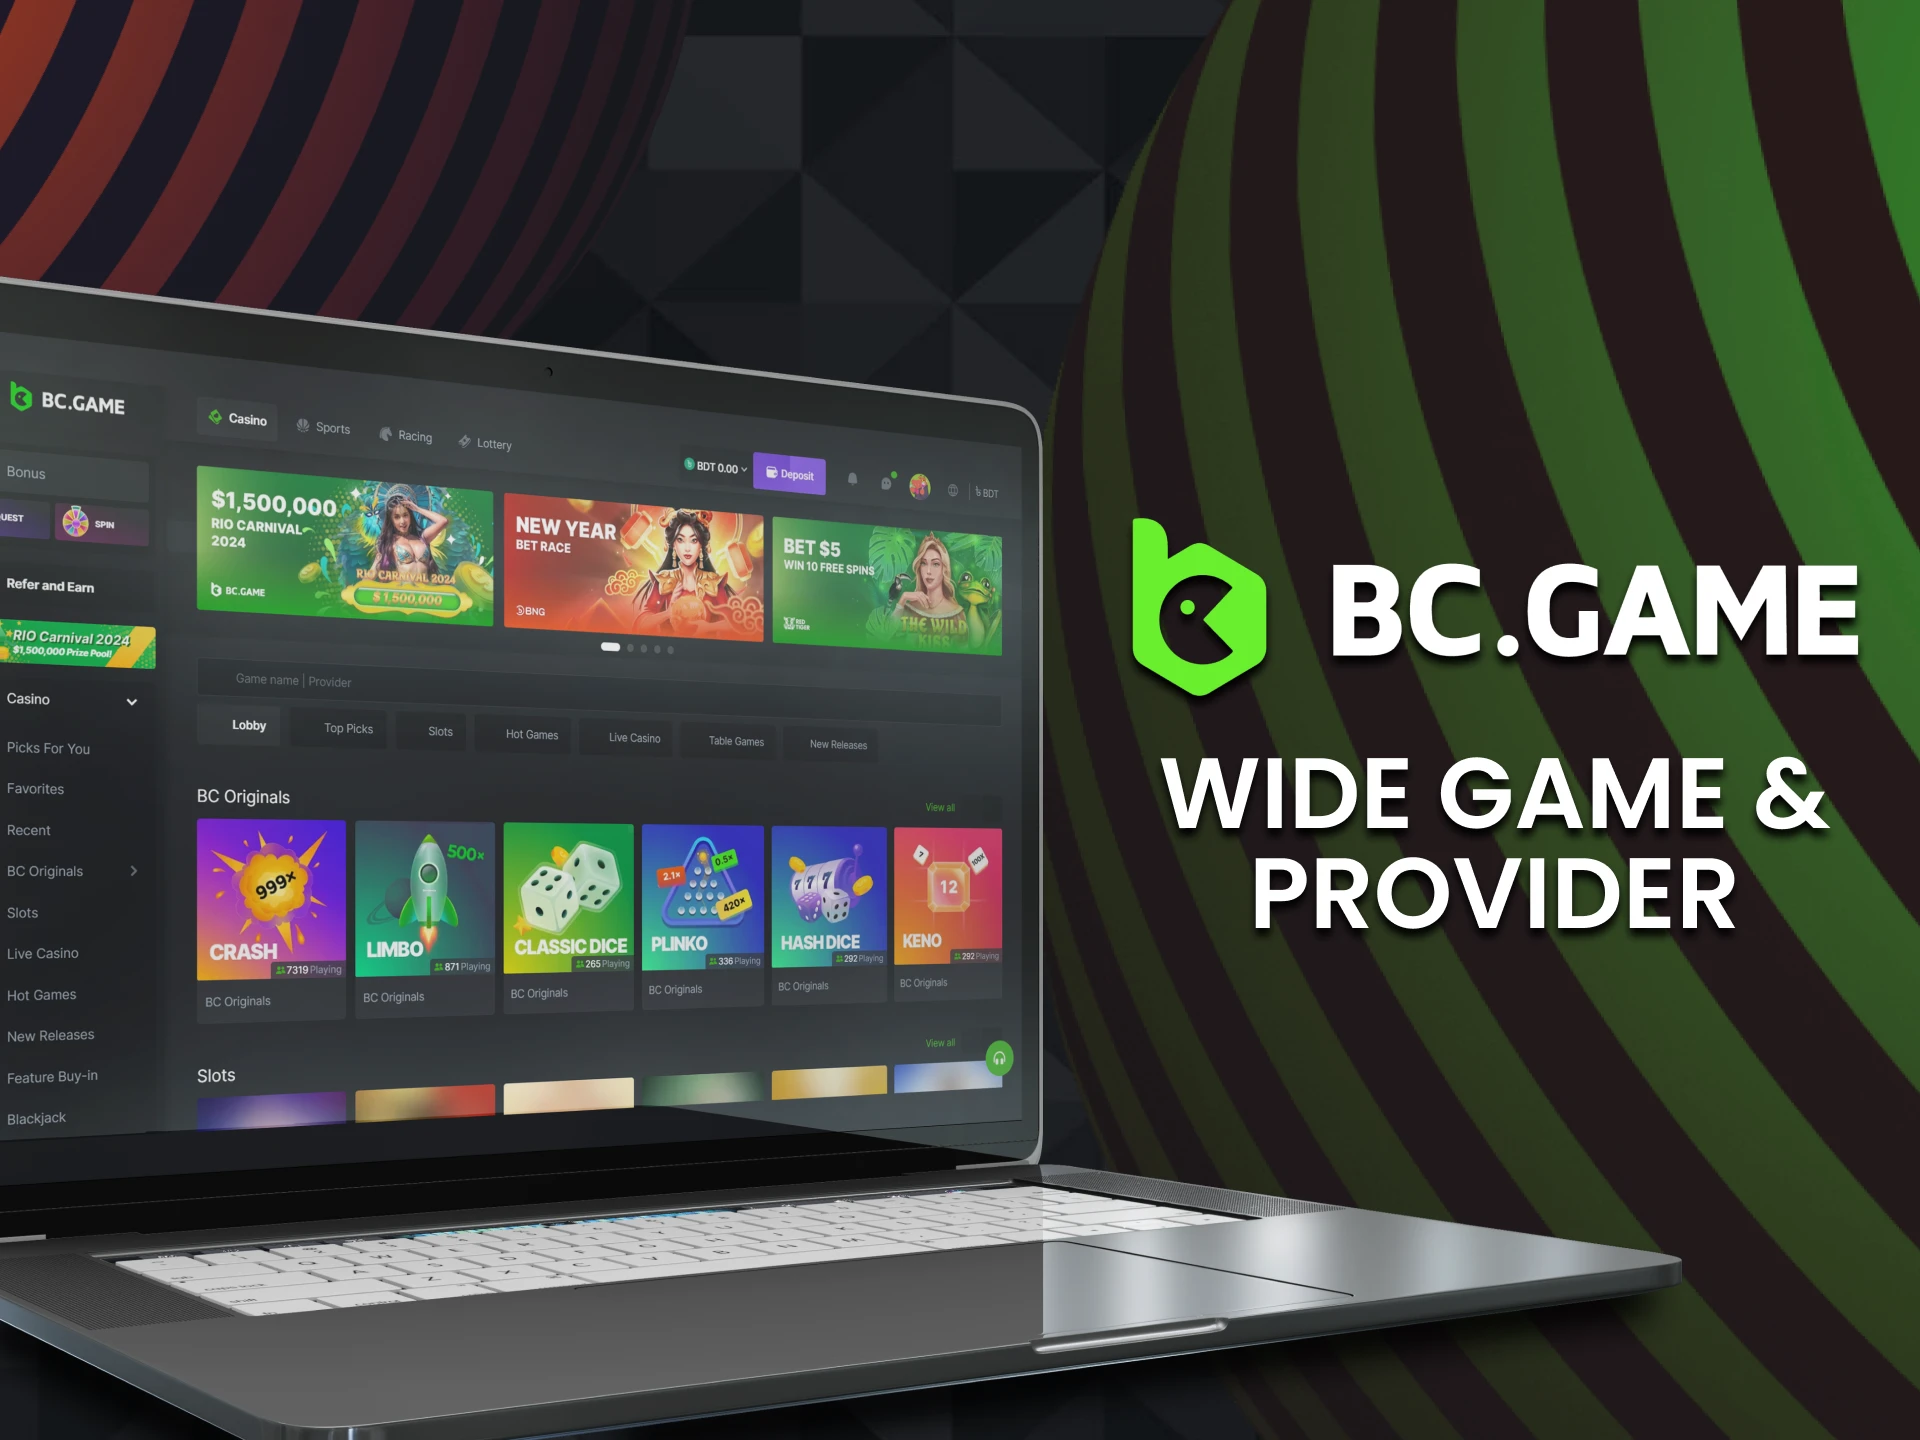 On the BCGame website you will find many games from providers.